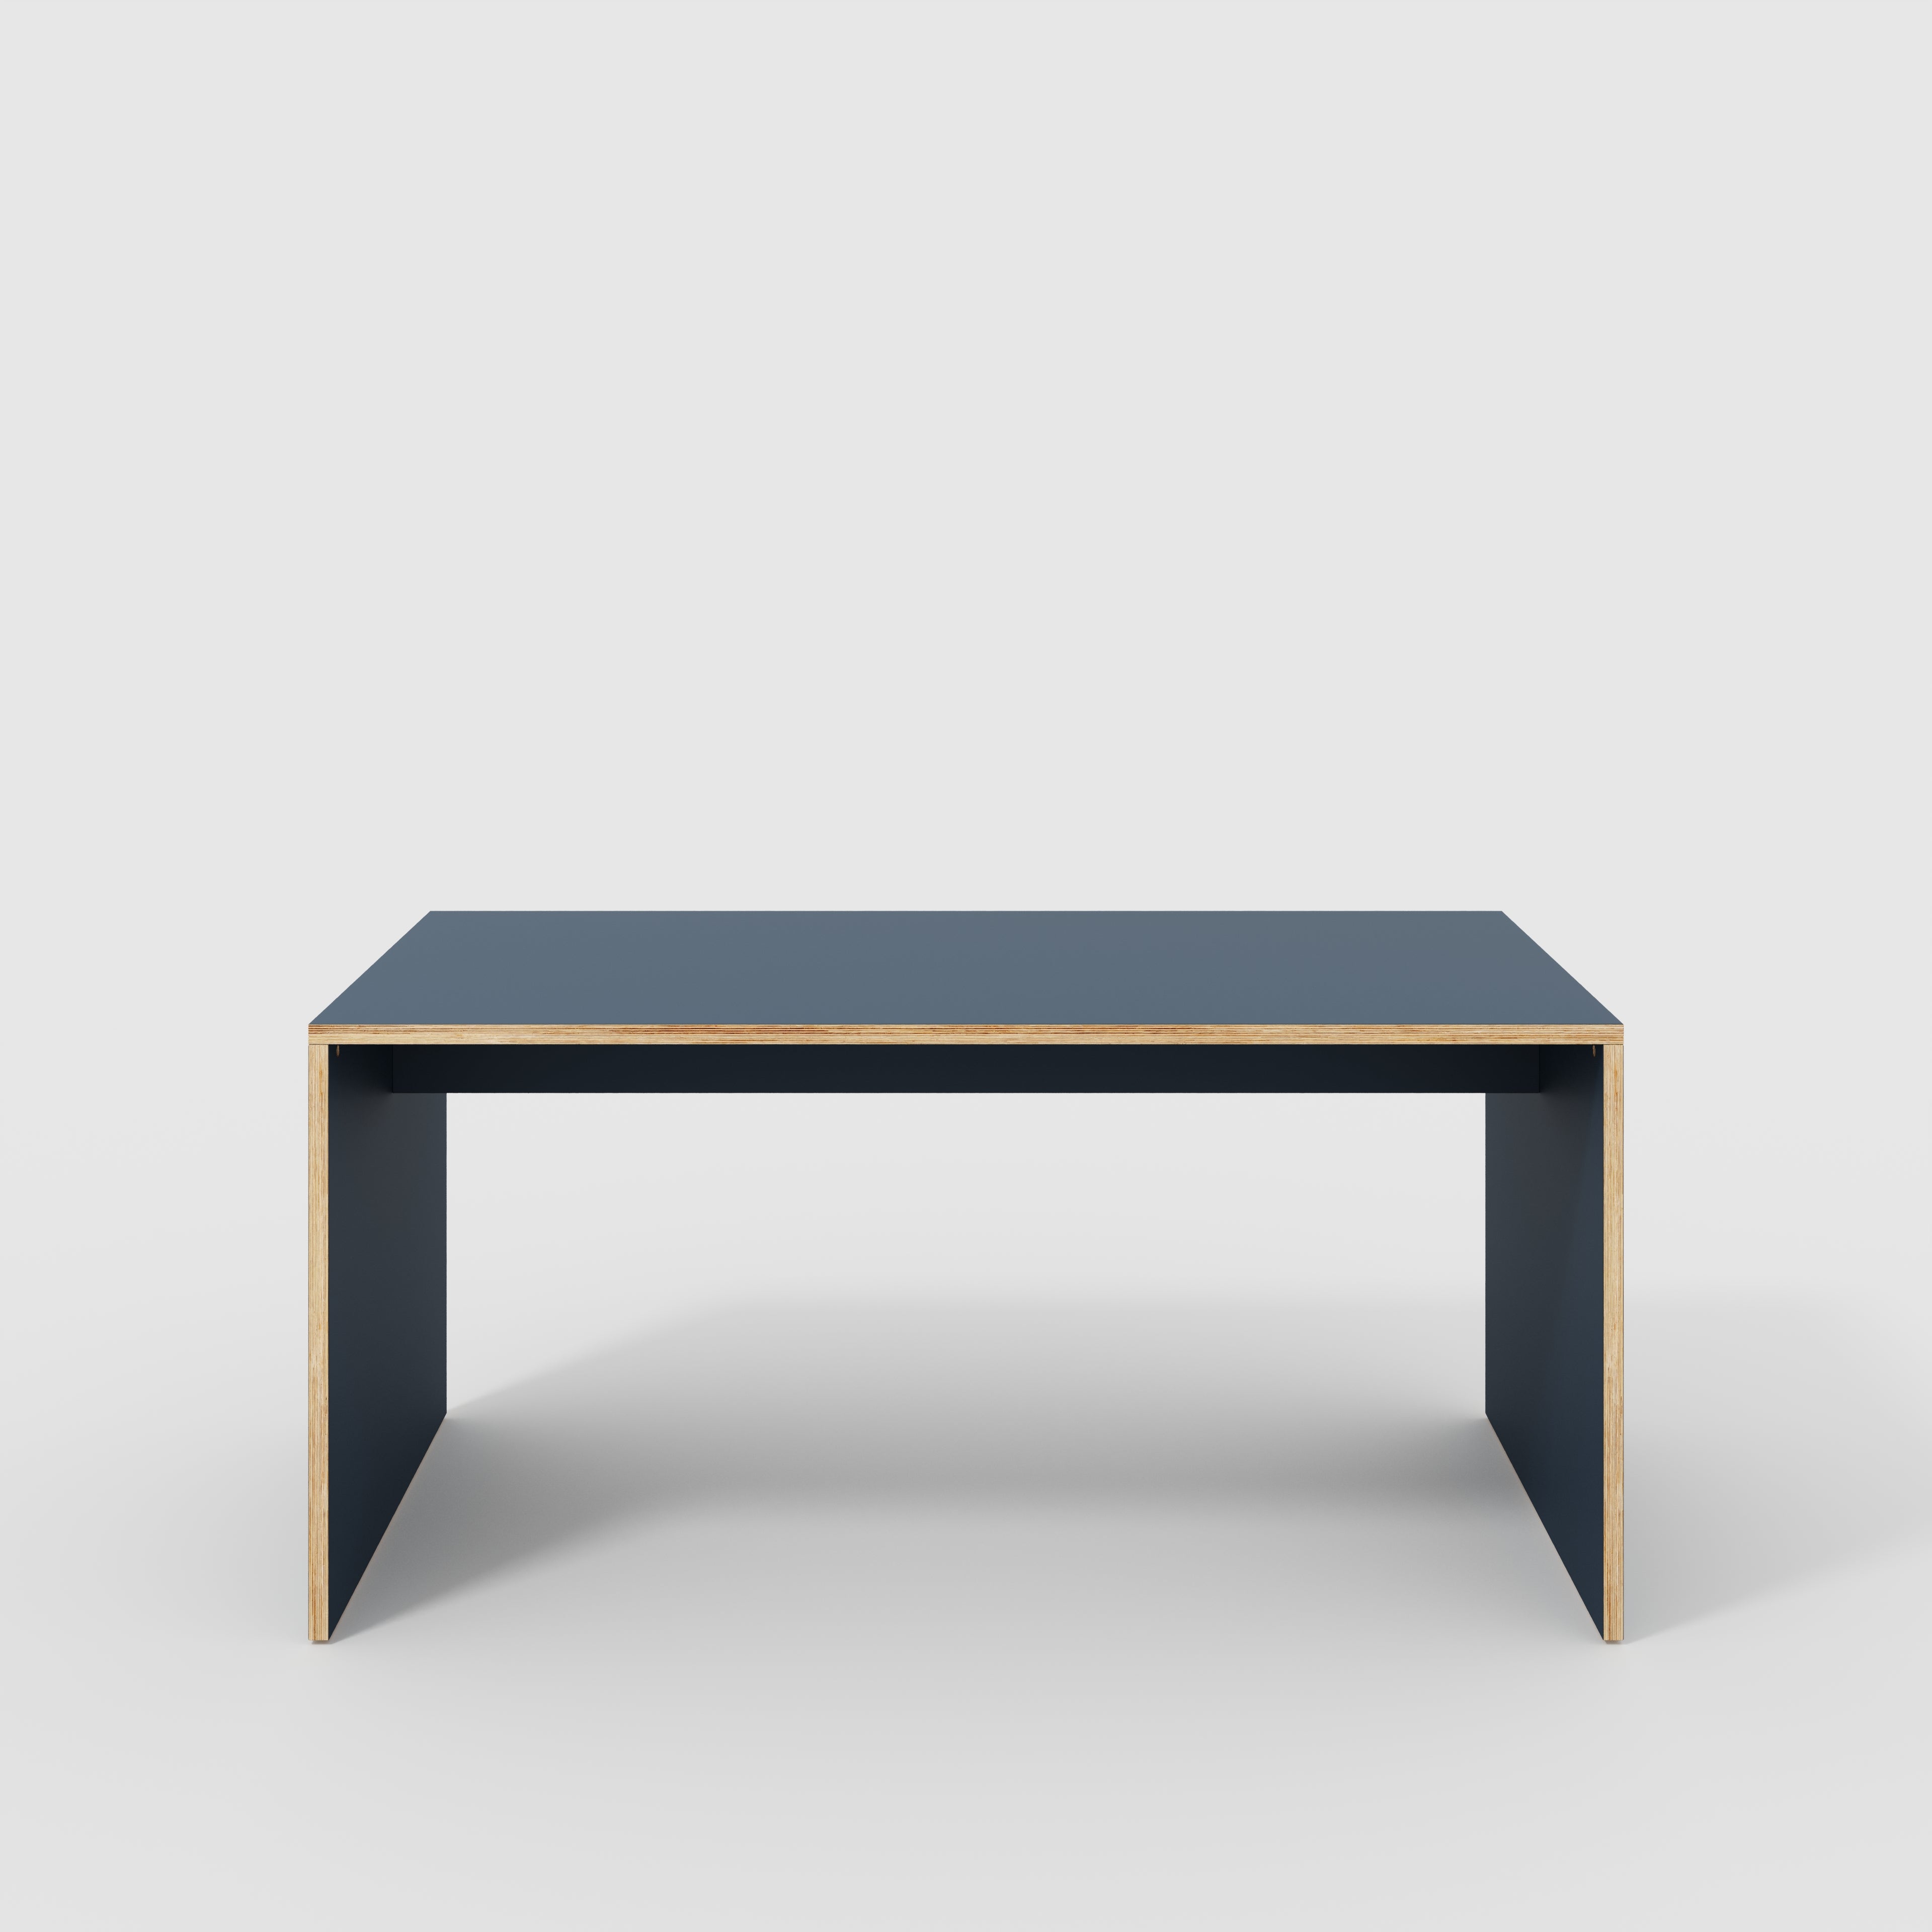 Table with Solid Sides - Formica Night Sea Blue - 1600(w) x 800(d) x 750(h)